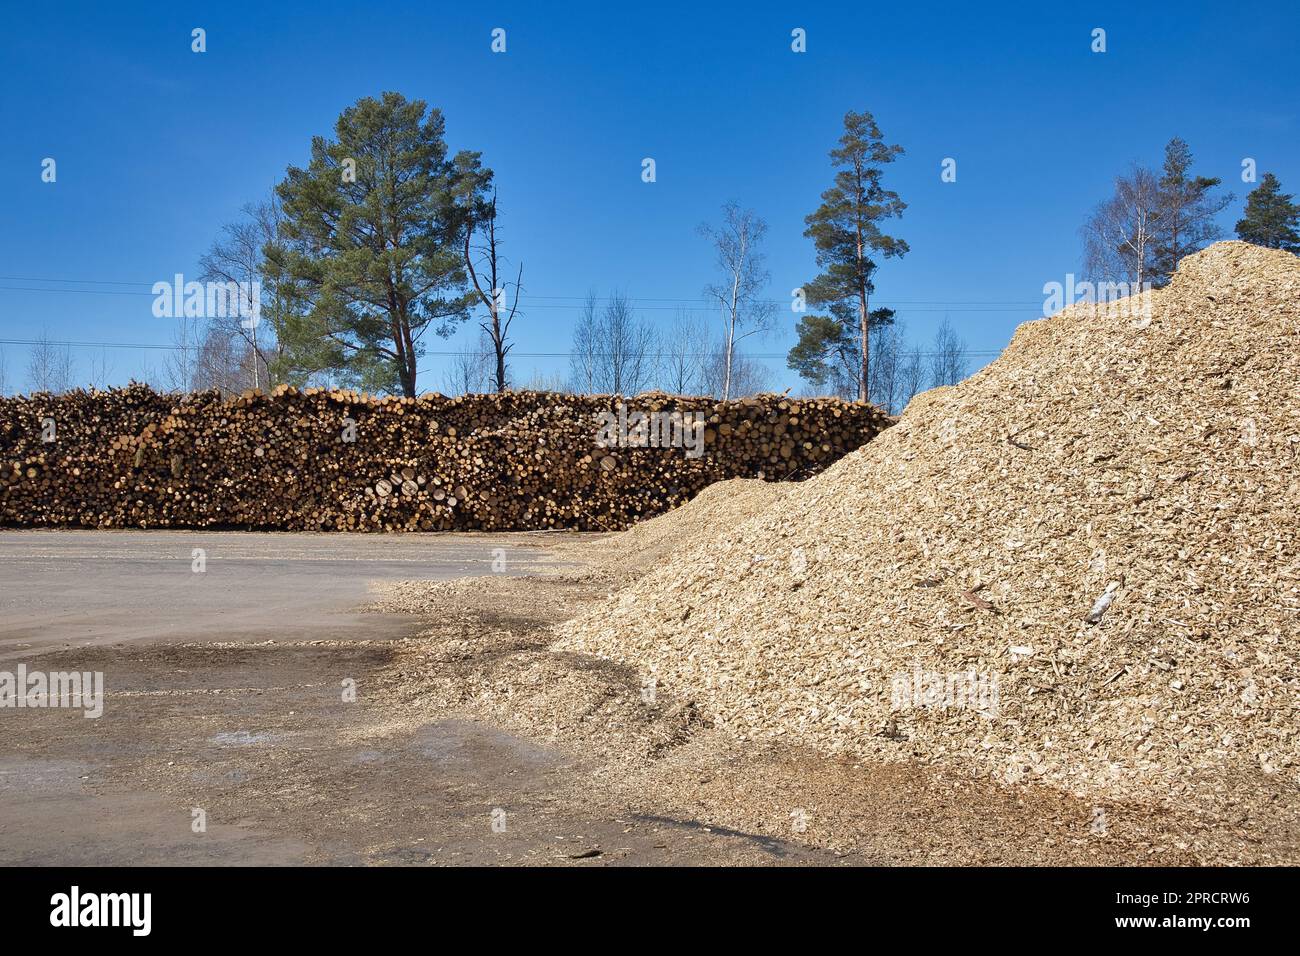 wood industry material stacked outdoors Stock Photo